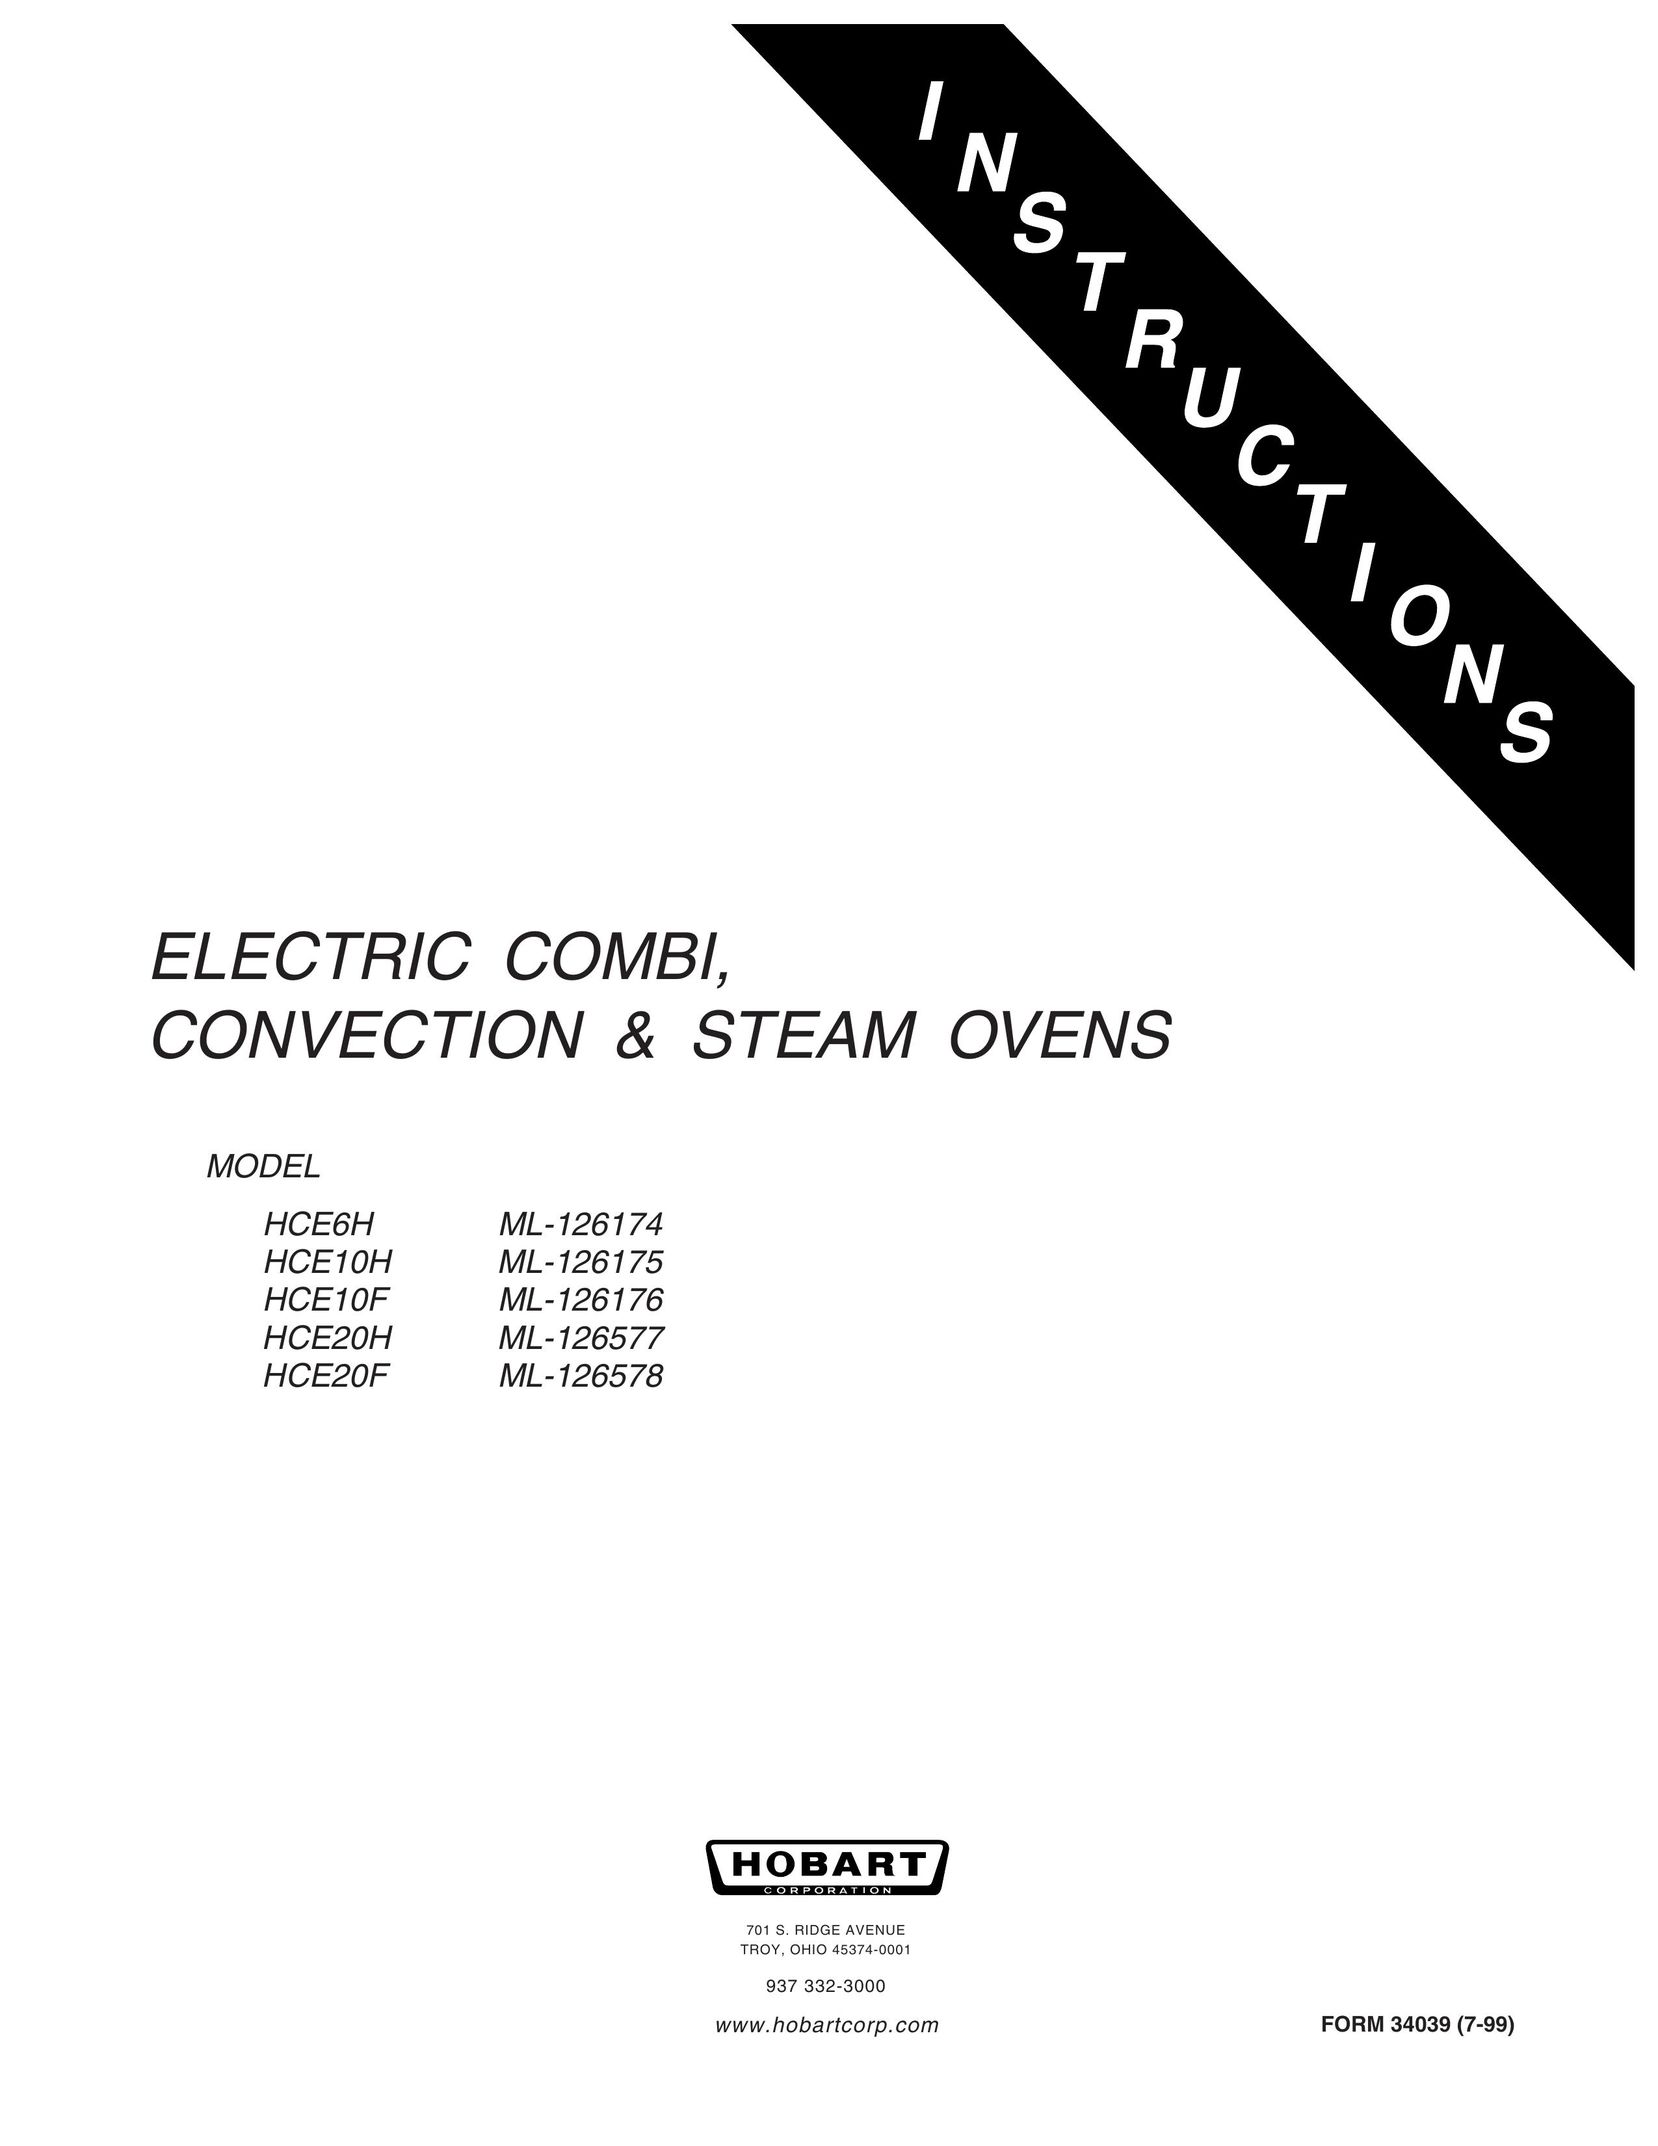 Hobart HCE10H ML-126175 Convection Oven User Manual